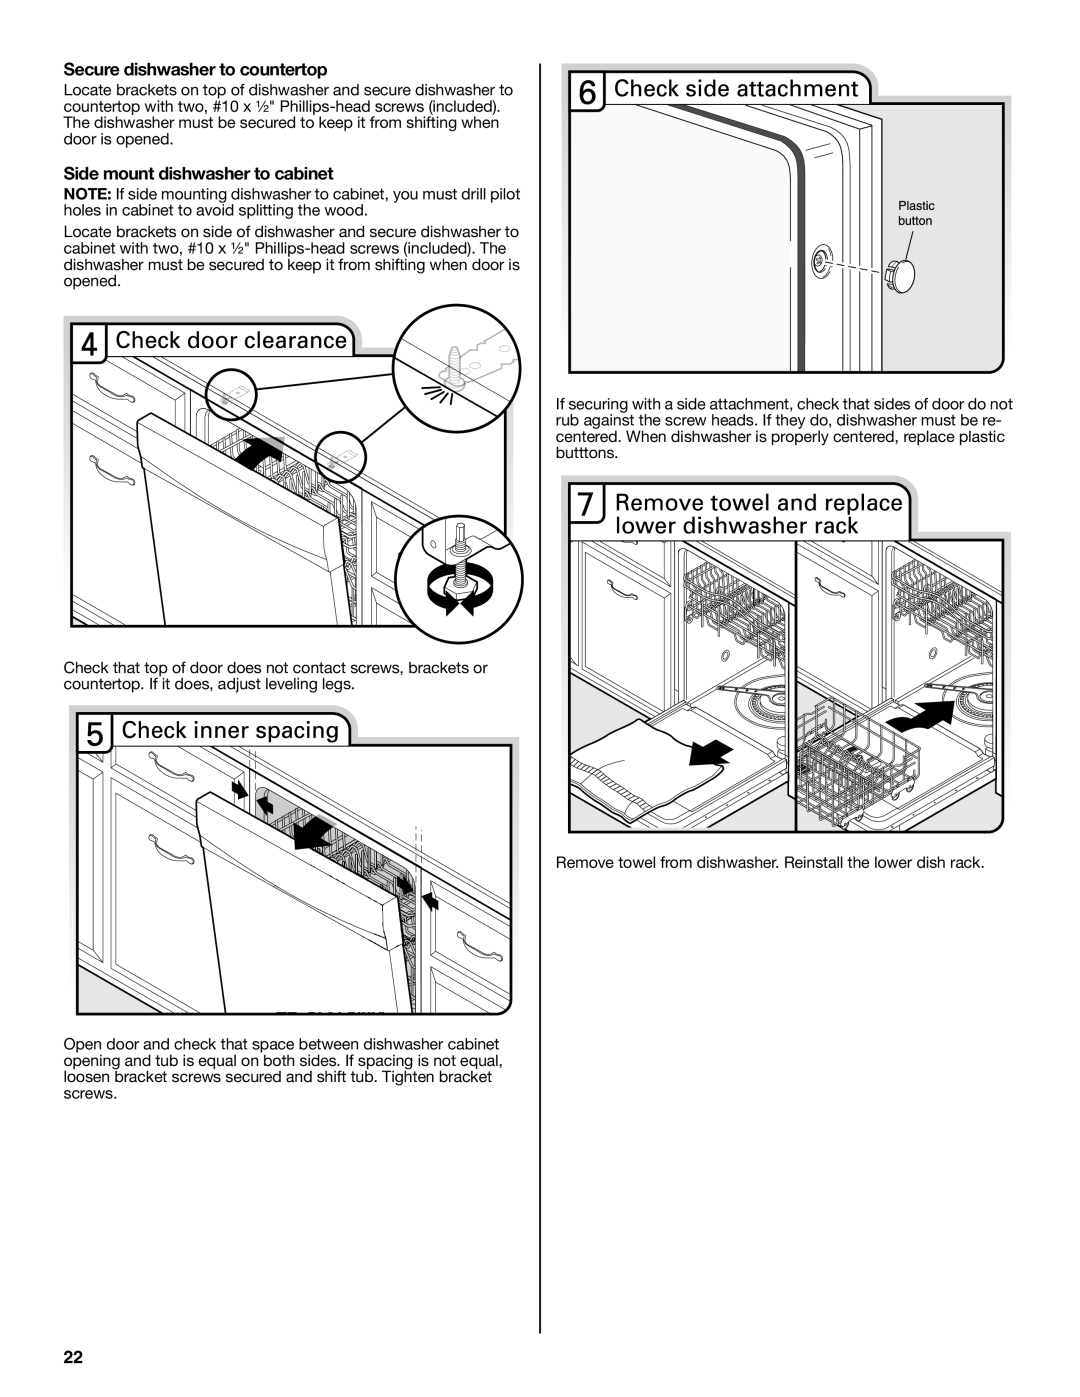 Maytag W10401504D installation instructions Secure dishwasher to countertop, Side mount dishwasher to cabinet 